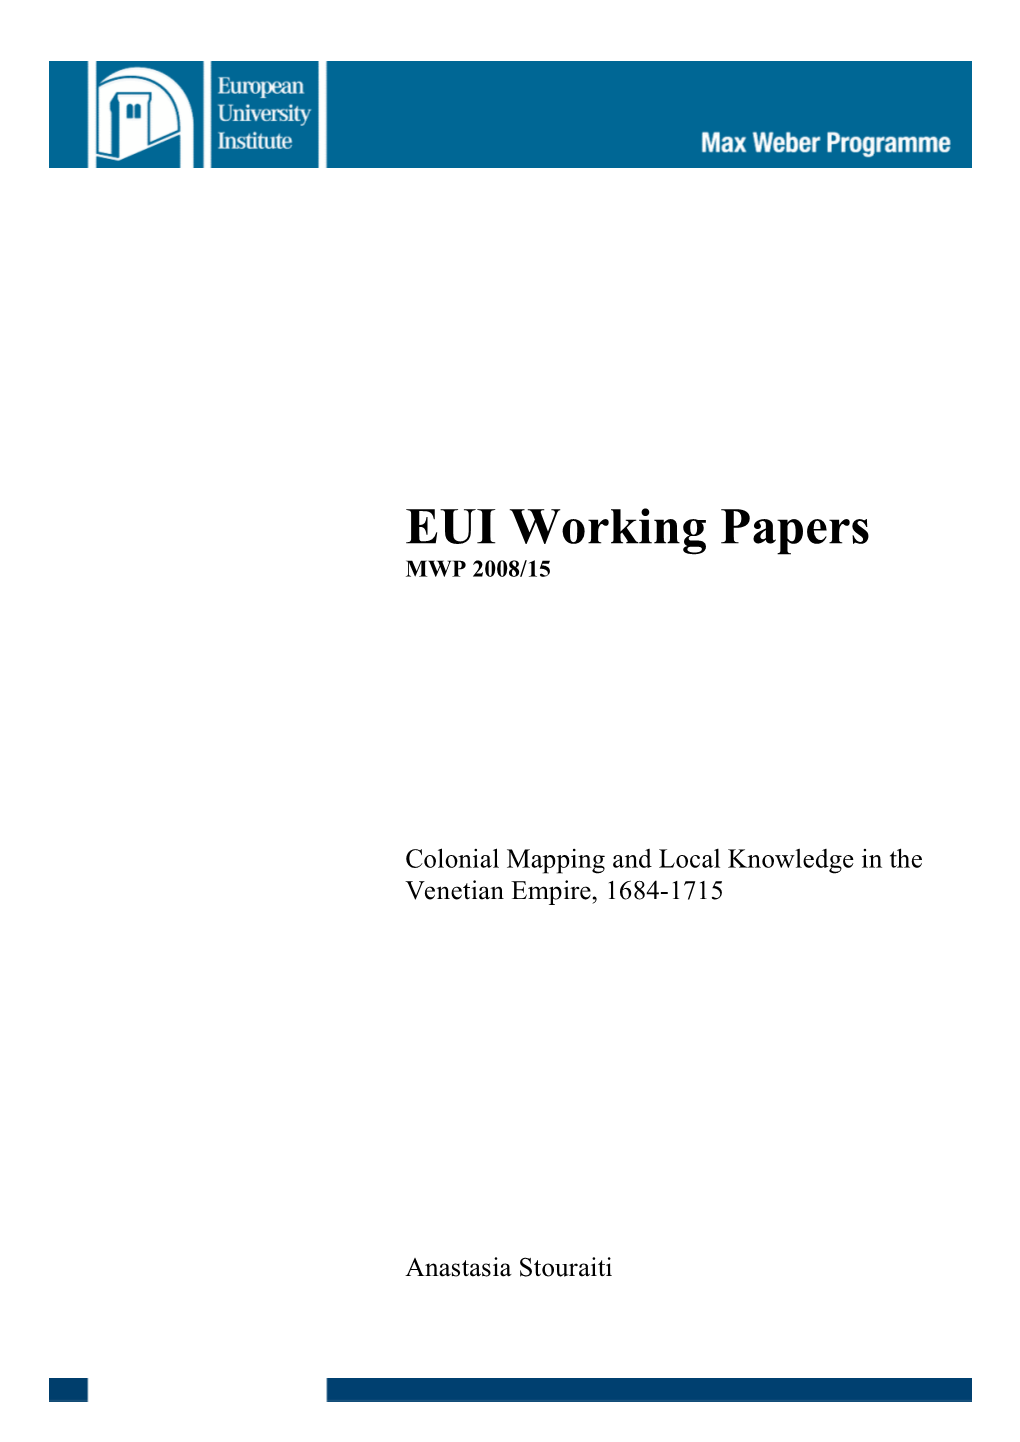 EUI Working Papers MWP 2008/15